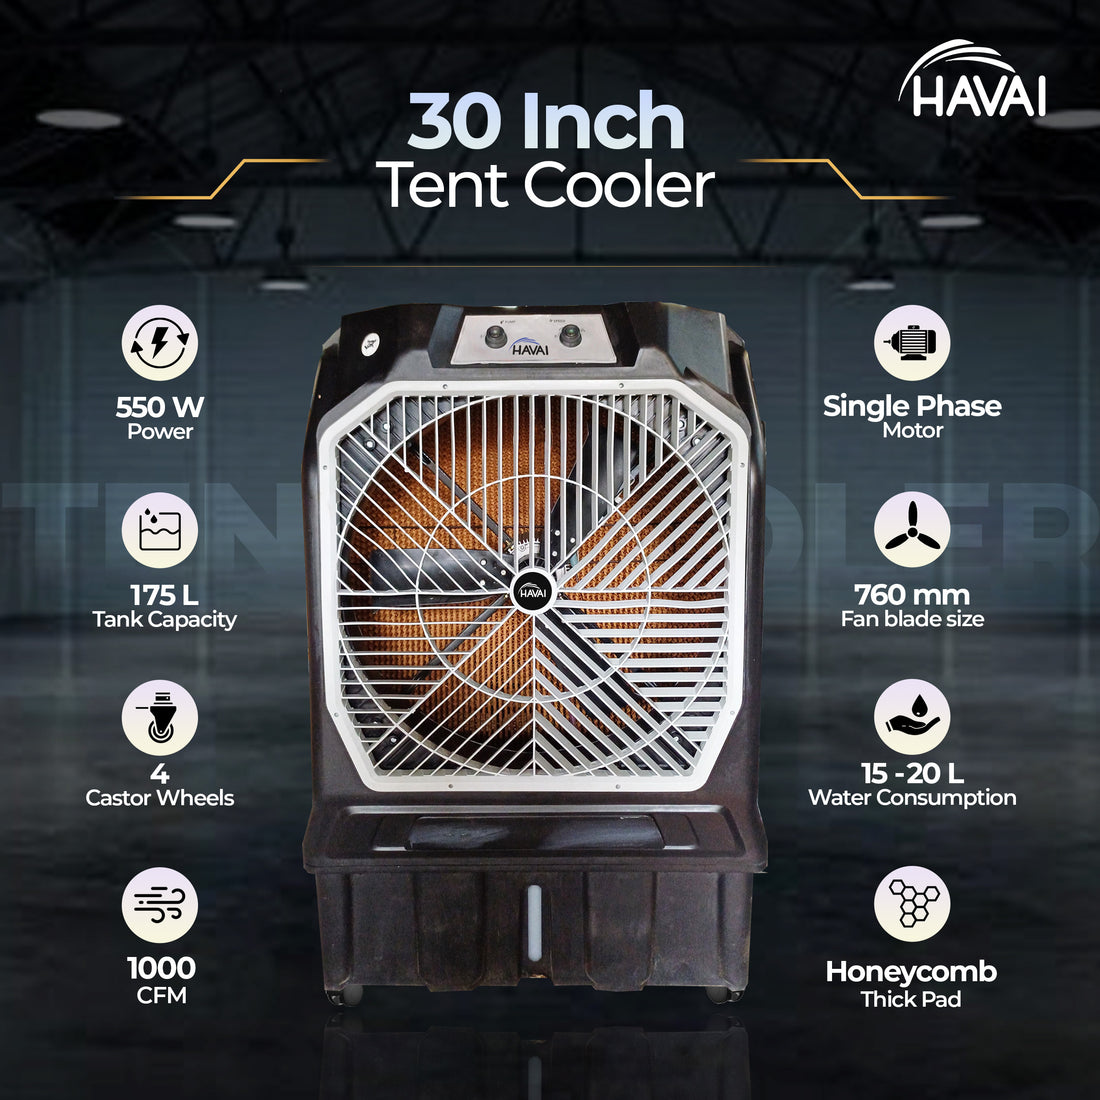 HAVAI 30 INCH Tent Commercial Cooler with Dense Honeycomb - 175 L, 30 Inch Blade, Black